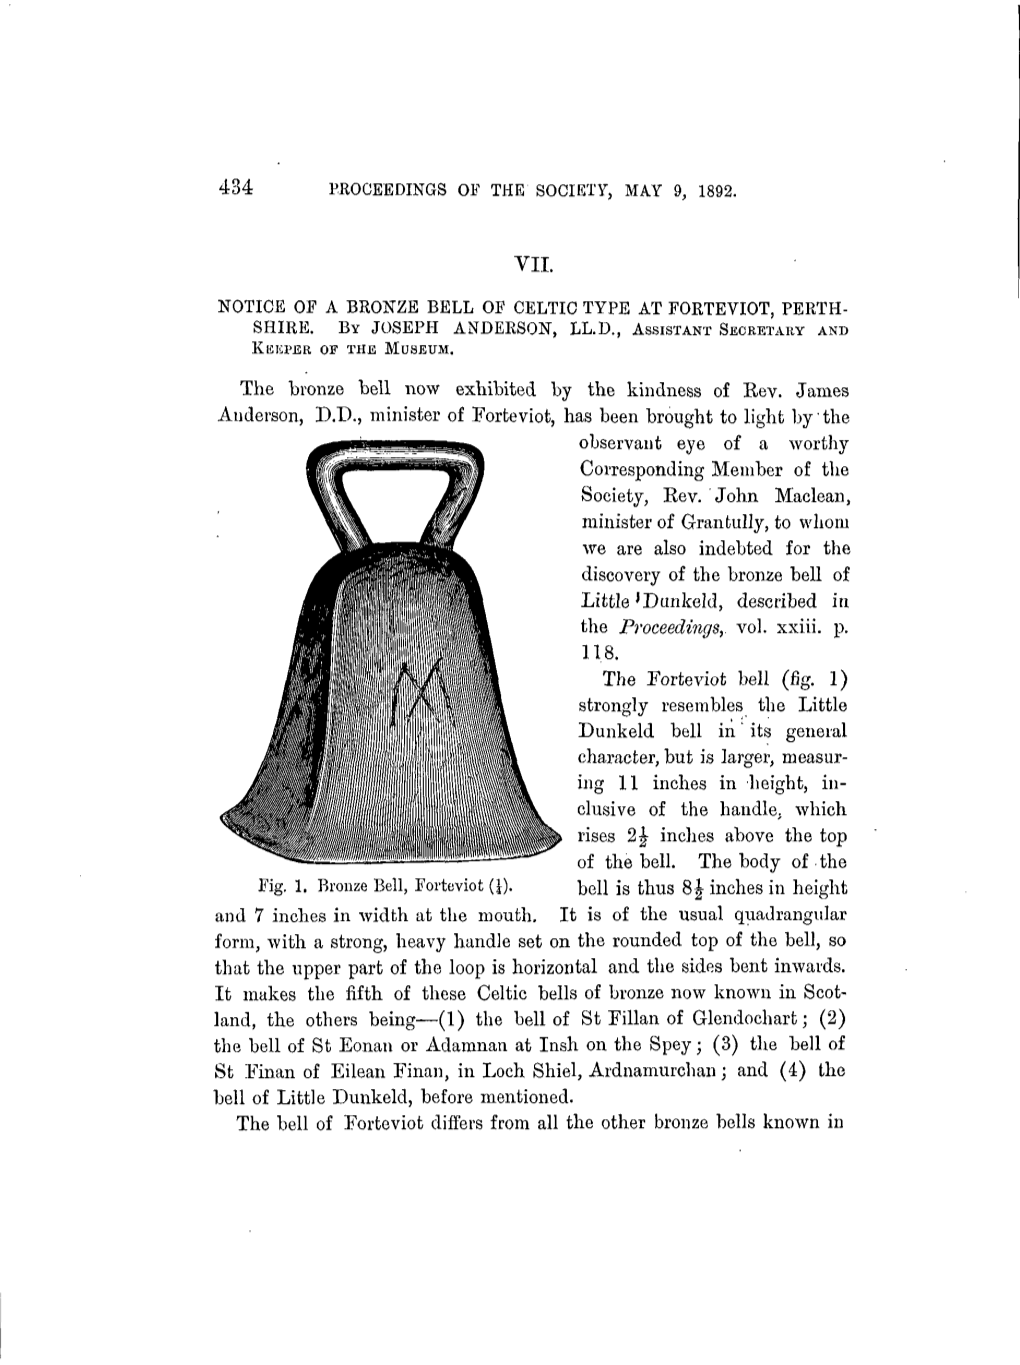 Proceedings of the Society, May 9, 1892. Notice of a Bronze Bell of Celtic Type at Forteviot, Perth- Shire. by Joseph Anderson